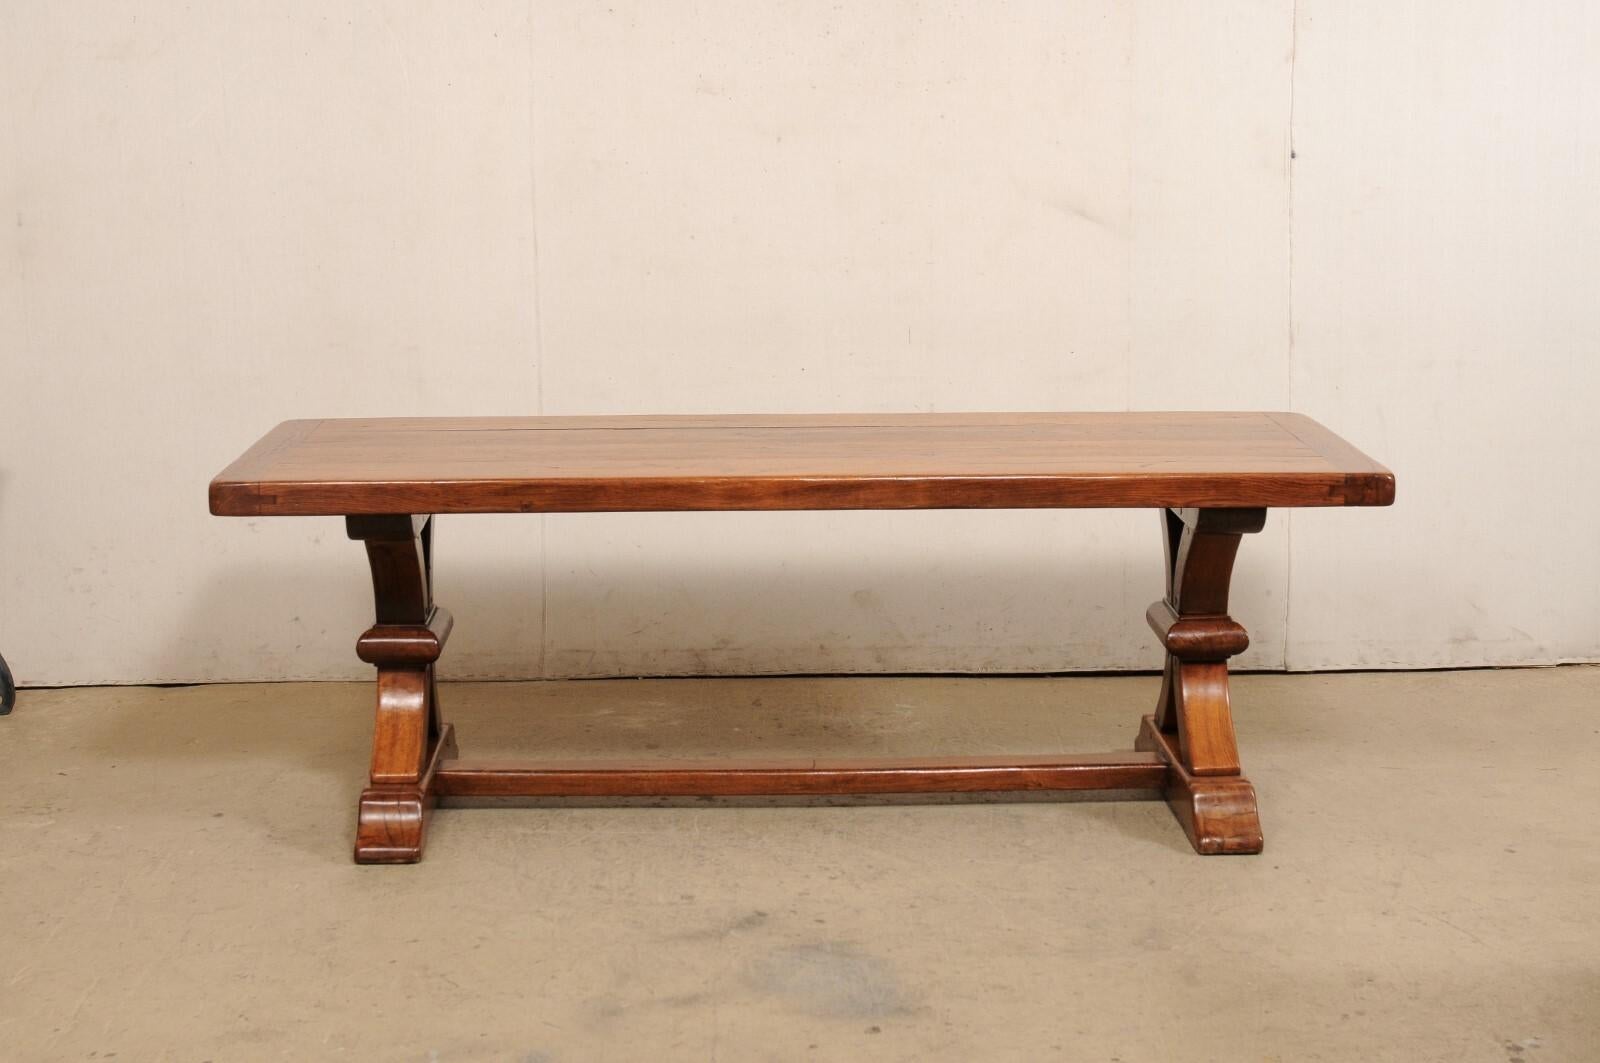 Antique French Wooden Dining Table w/Nicely Carved Trestle Legs, 7+ Ft Long For Sale 4